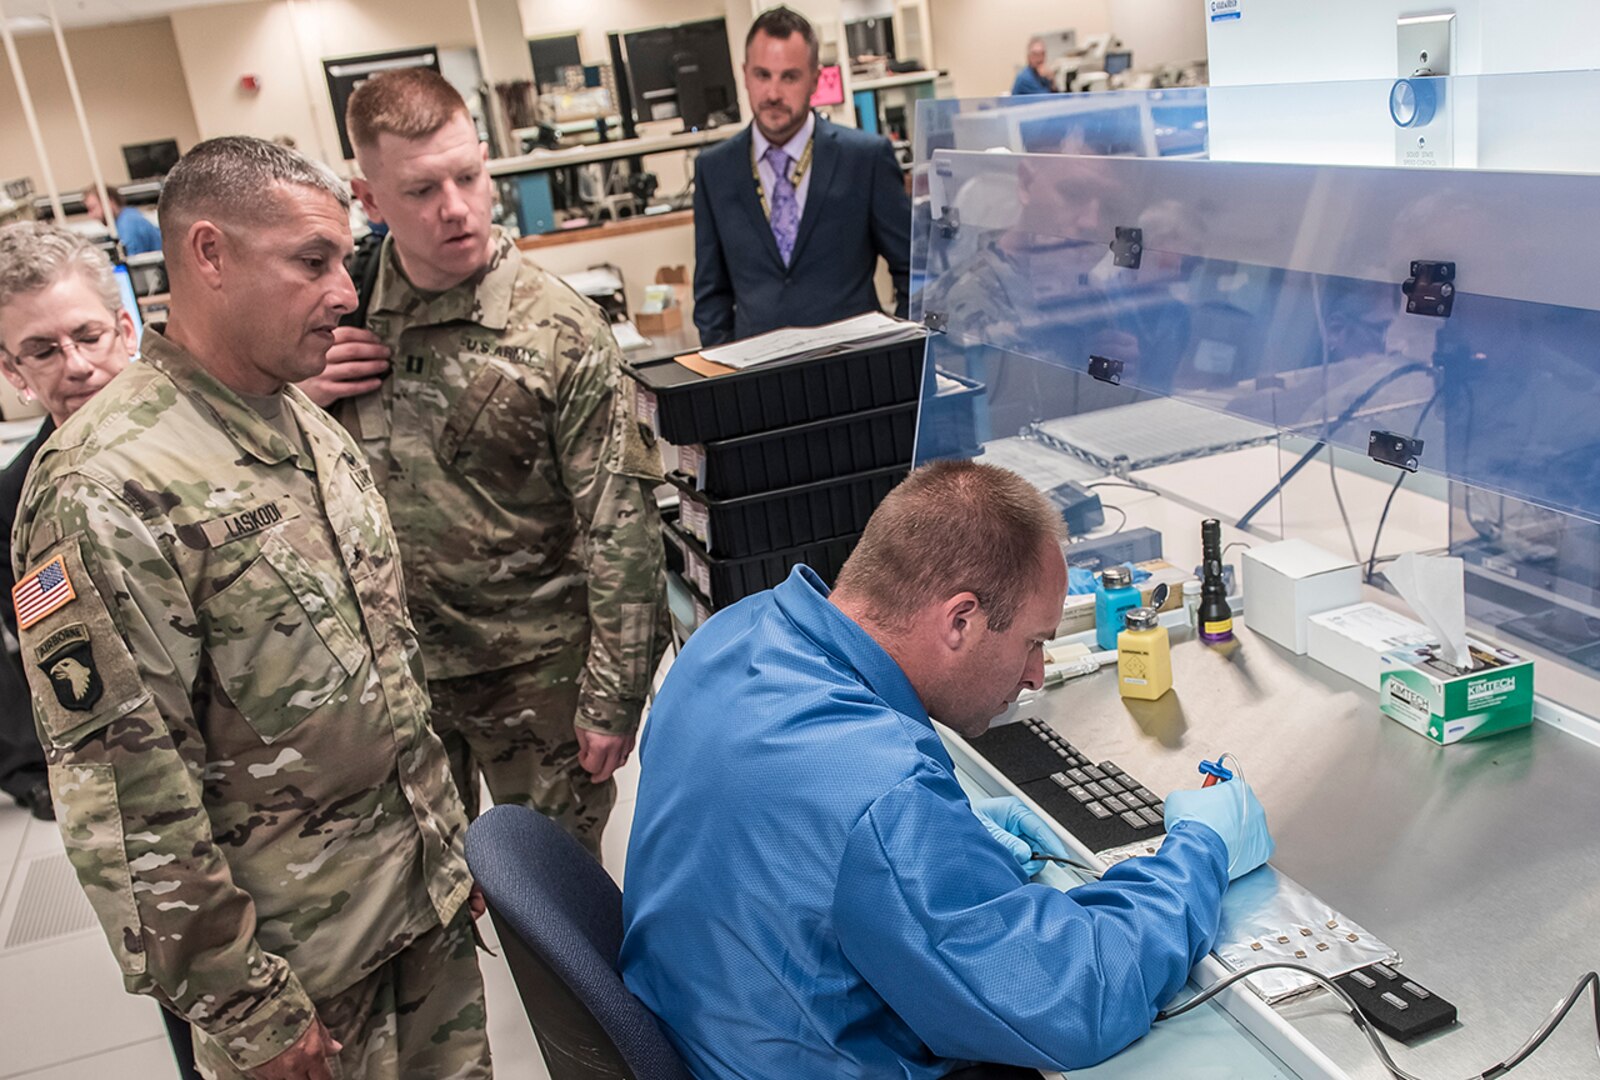 Brig. Gen. Laskodi watches as a lab technician scans microcircuits at DLA Land and Maritime's DNA Identification and Marking Center